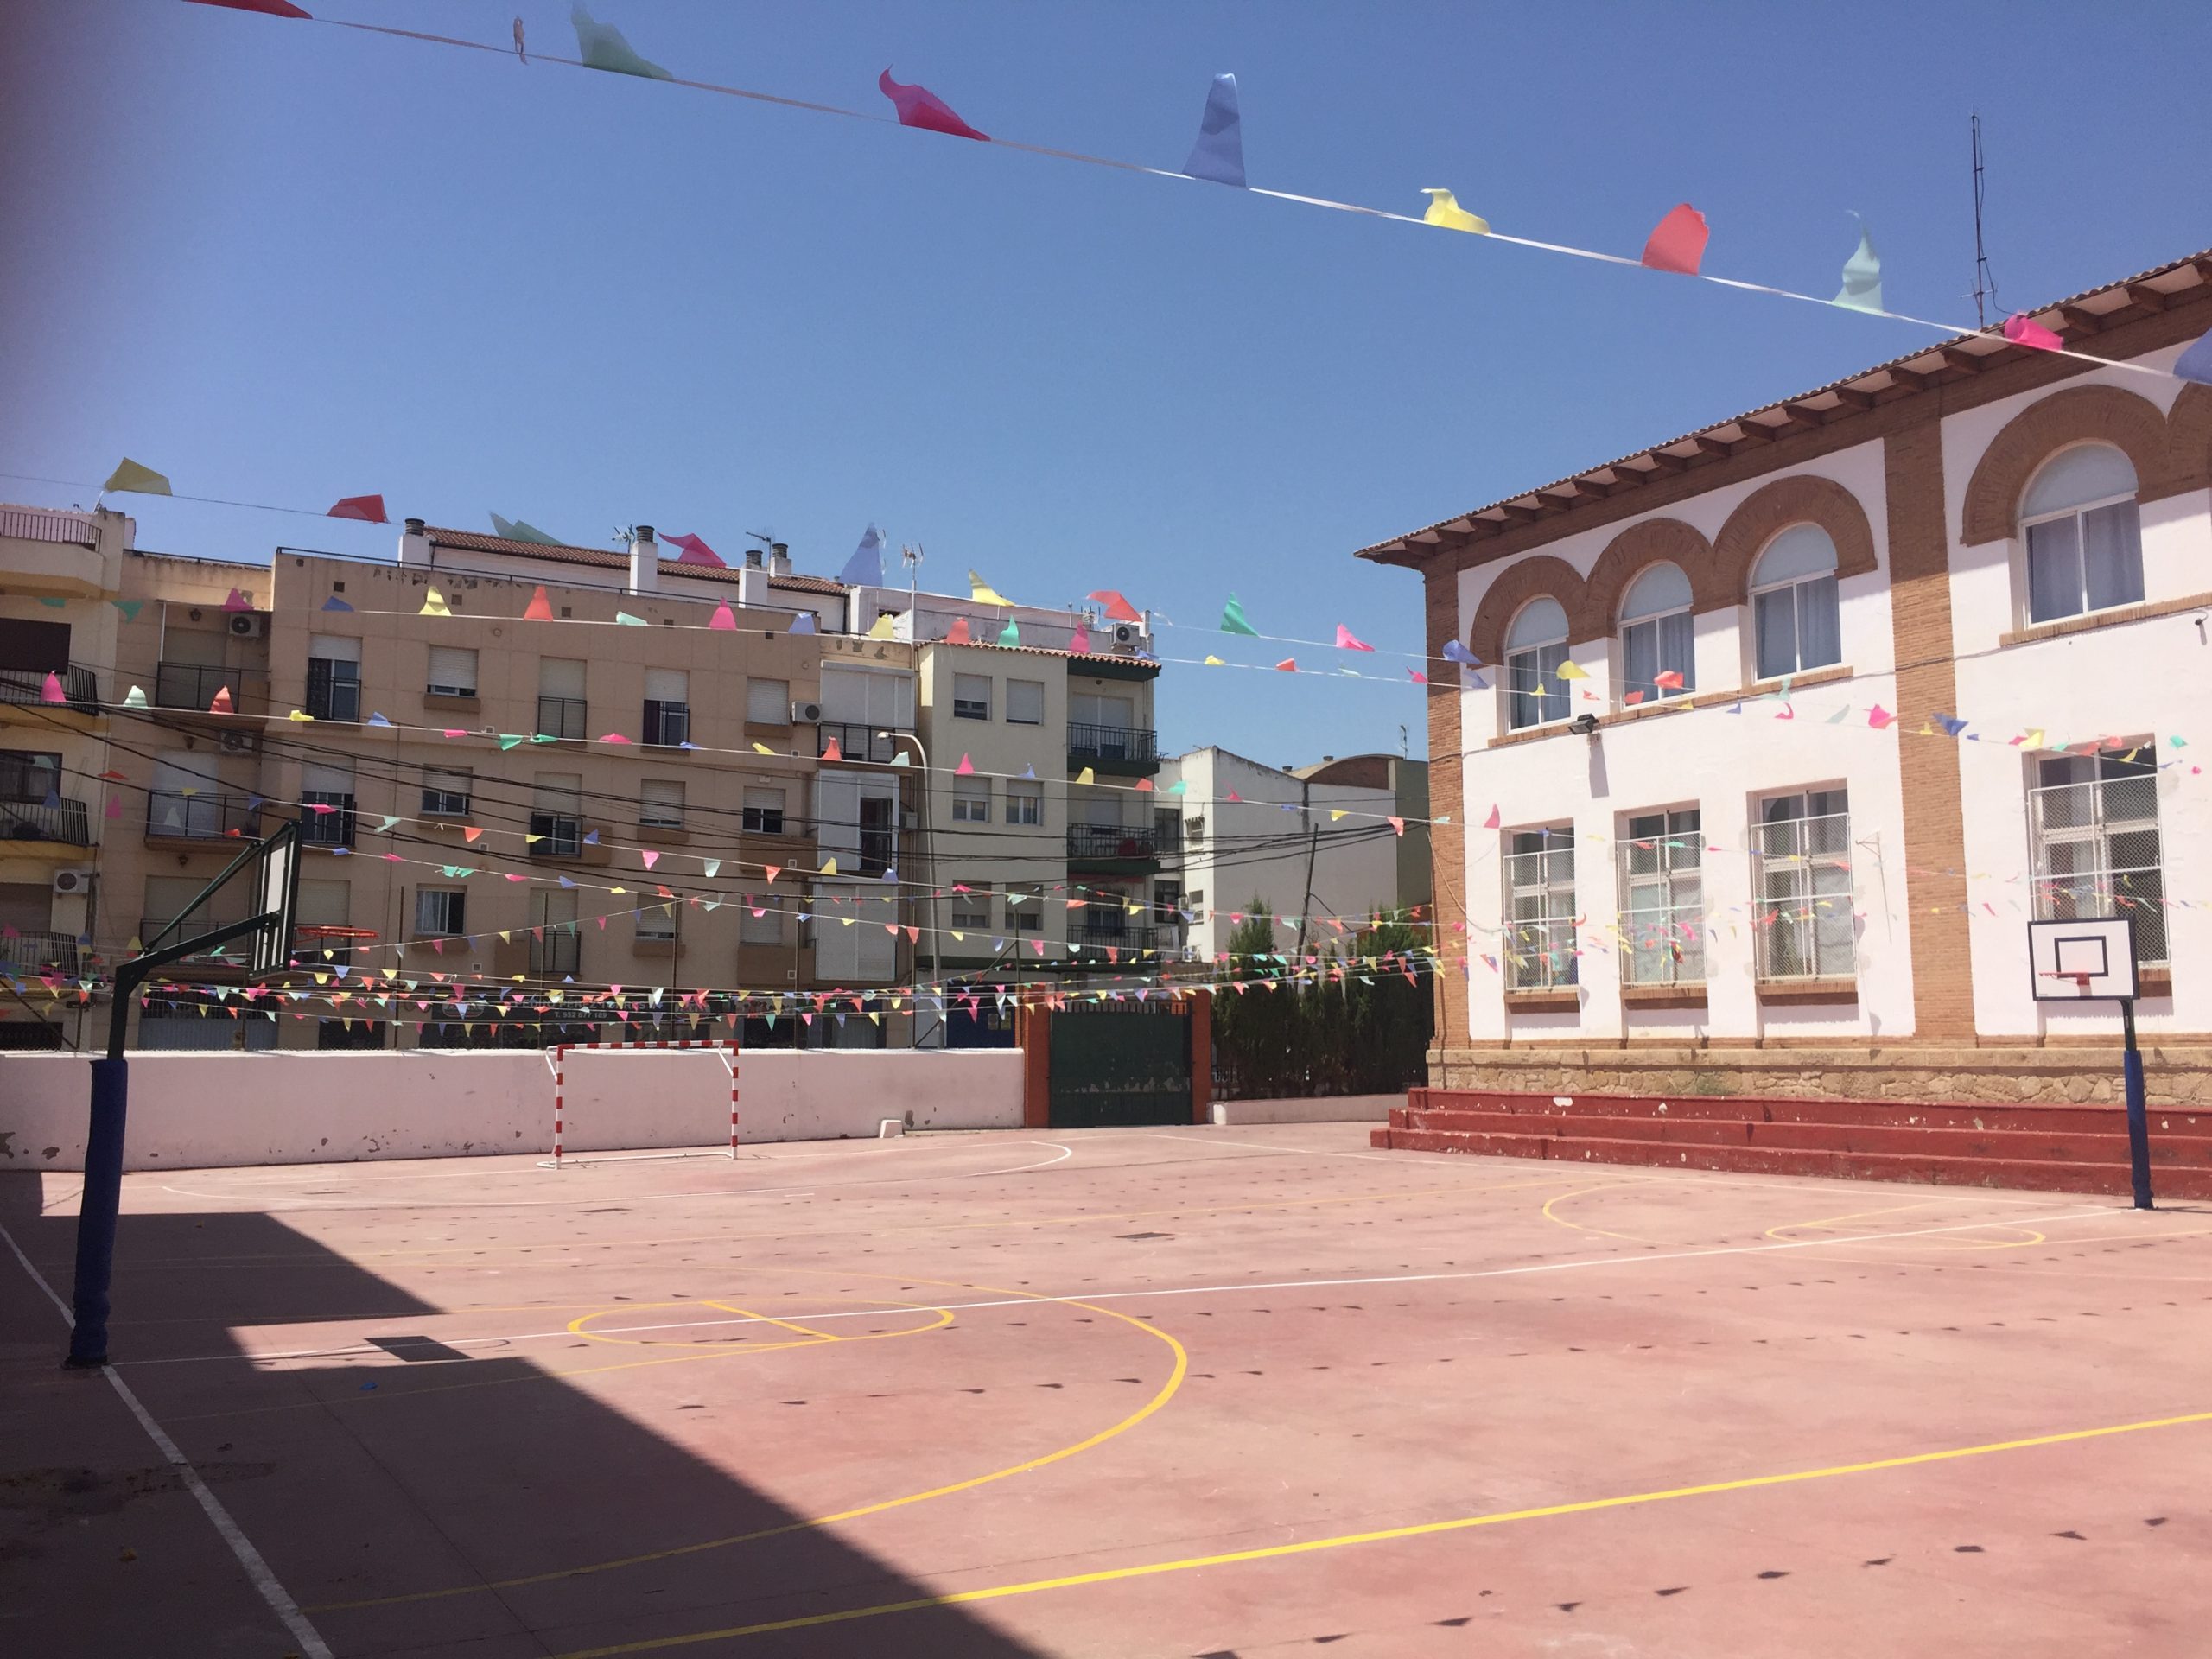 A schoolyard of an elementary school in Spain is decorated with banners